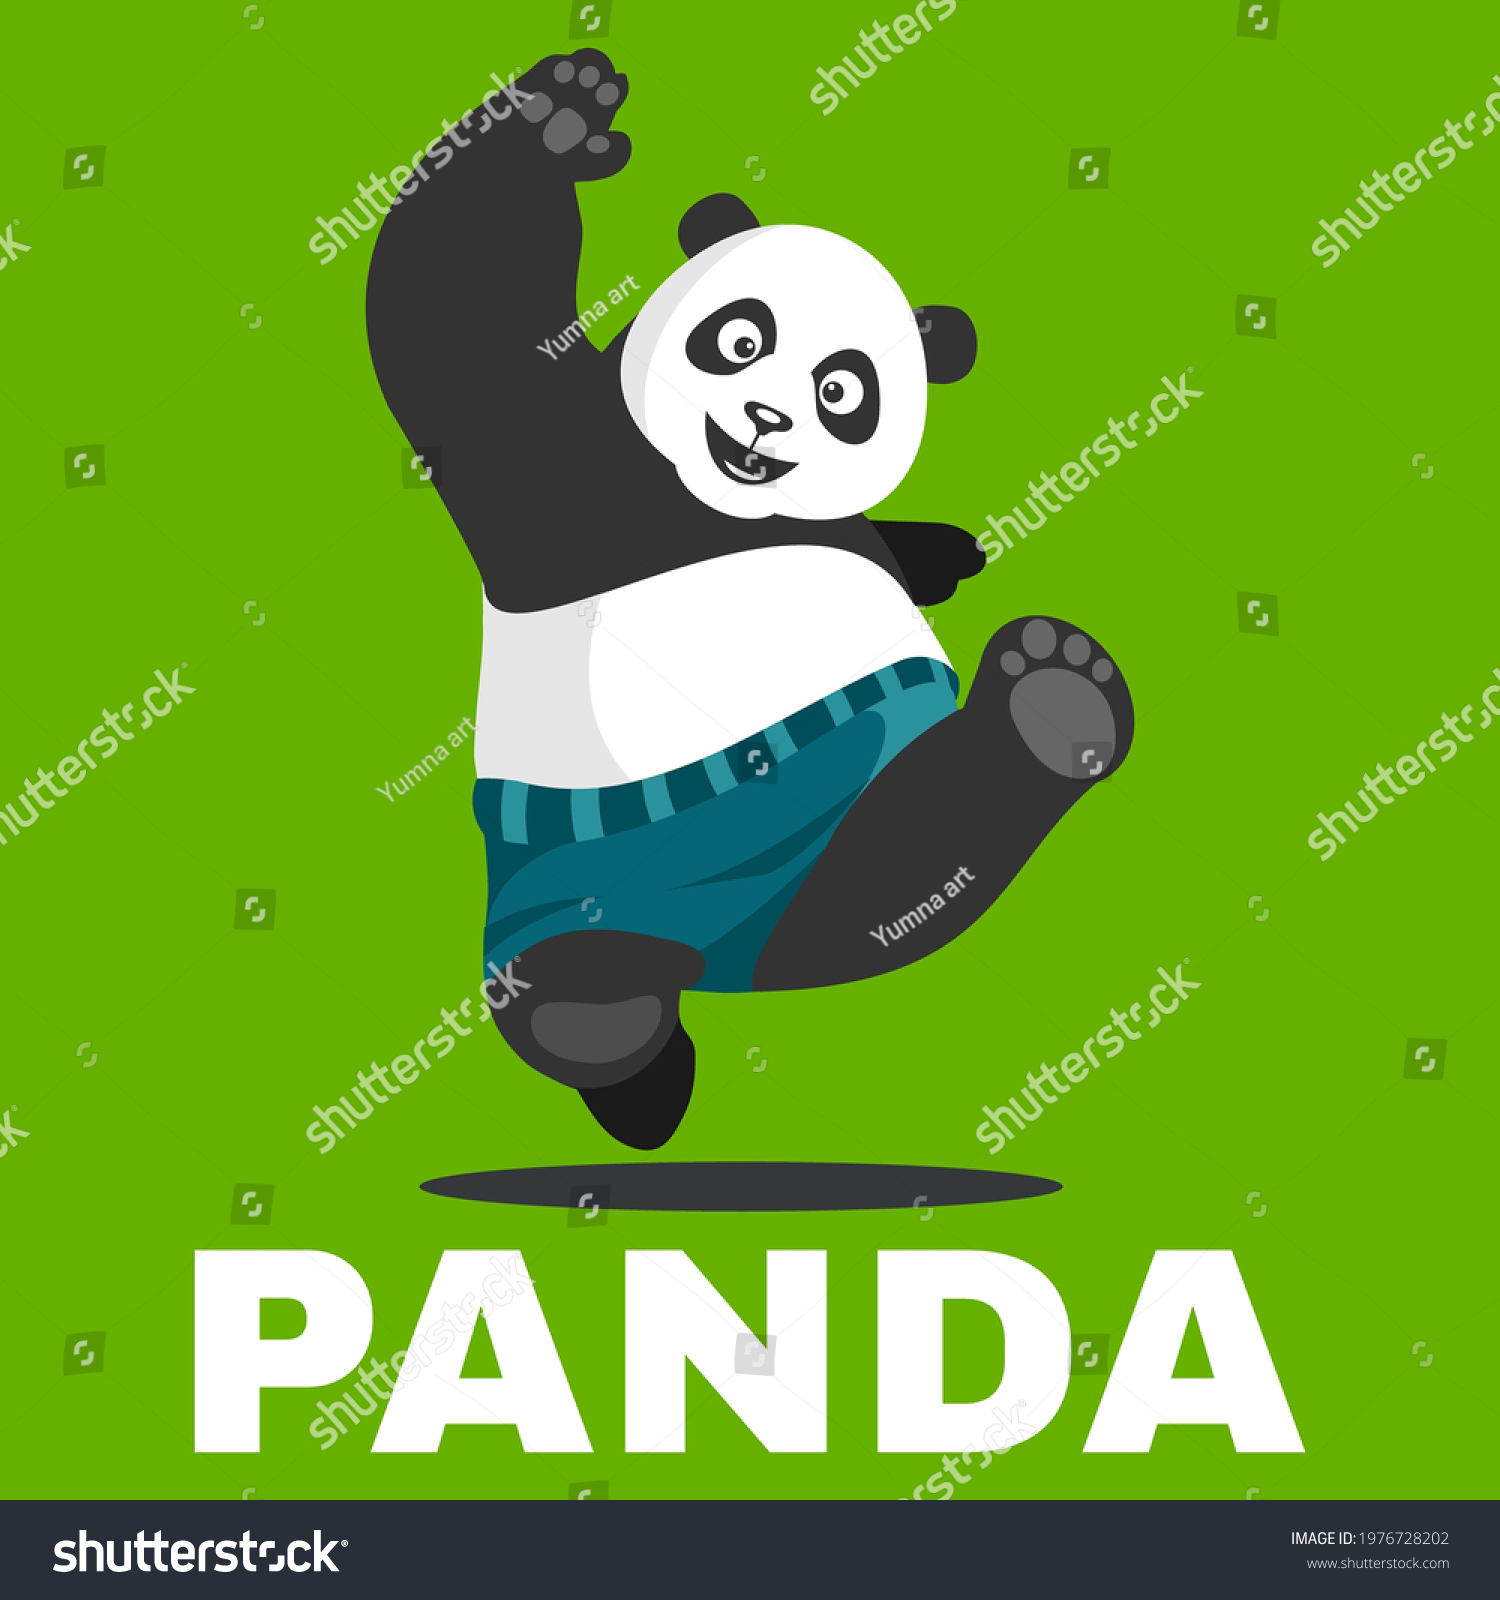 SVG of illustration vector graphic of The walking fat panda character is perfect for mascots, children's t-shirts, logos and icons svg